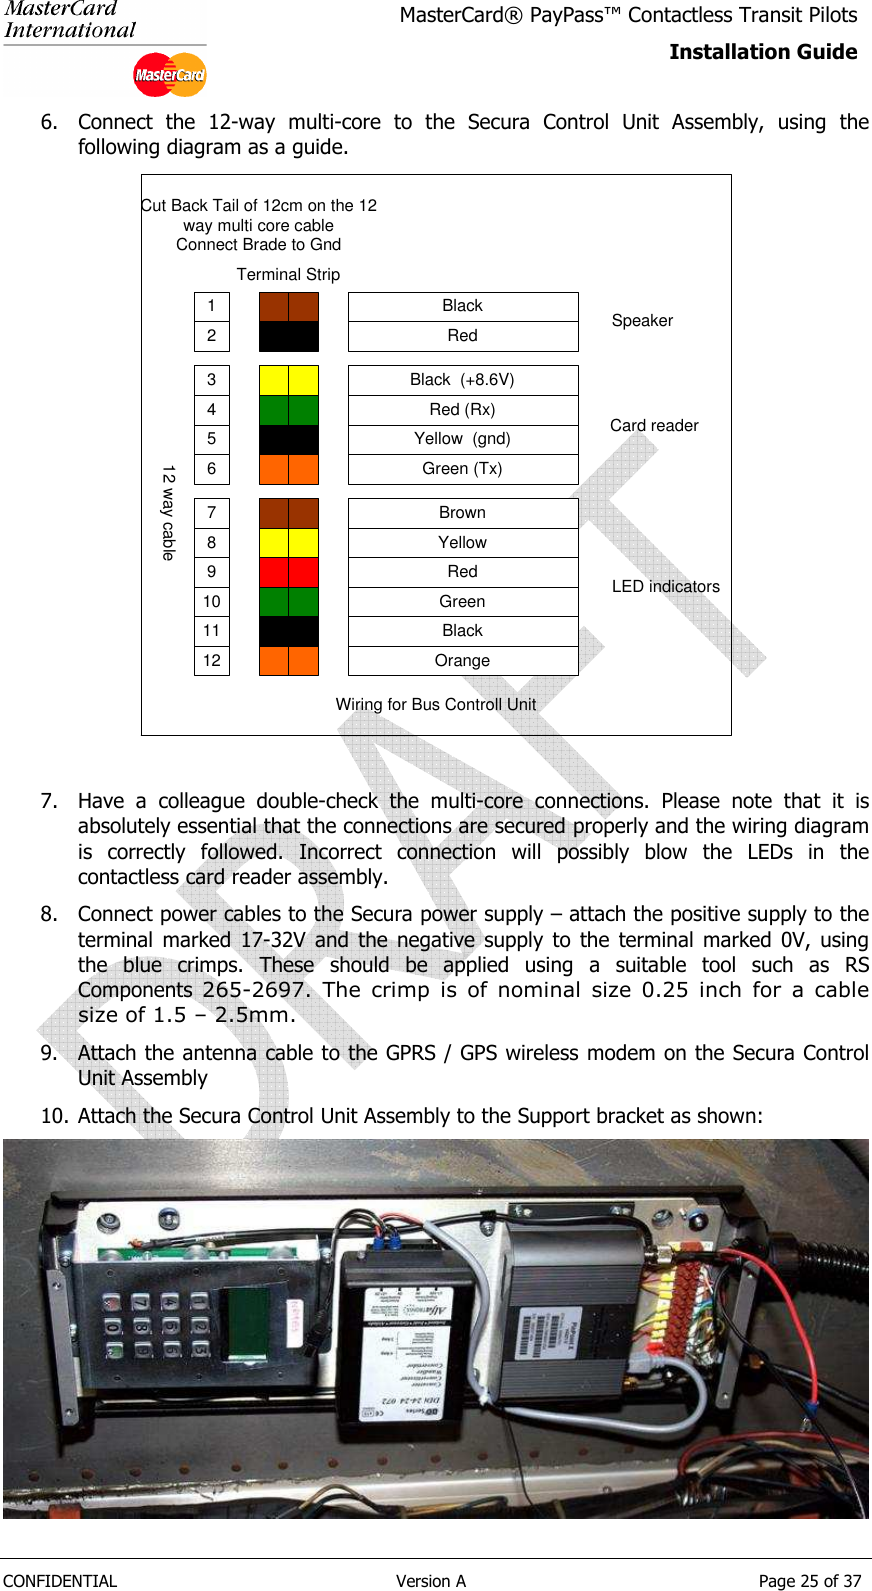   CONFIDENTIAL  Version A  Page 25 of 37 MasterCard® PayPass™ Contactless Transit Pilots Installation Guide  6. Connect  the  12-way  multi-core  to  the  Secura  Control  Unit  Assembly,  using  the following diagram as a guide. 1 Black2 Red3 Black  (+8.6V)4 Red (Rx)5 Yellow  (gnd)6 Green (Tx)7 Brown8 Yellow9 Red10 Green11 Black12 OrangeCard readerSpeakerLED indicatorsWiring for Bus Controll UnitTerminal Strip12 way cableConnect Brade to GndCut Back Tail of 12cm on the 12way multi core cable  7. Have  a  colleague  double-check  the  multi-core  connections.  Please  note  that  it  is absolutely essential that the connections are secured properly and the wiring diagram is  correctly  followed.  Incorrect  connection  will  possibly  blow  the  LEDs  in  the contactless card reader assembly. 8. Connect power cables to the Secura power supply – attach the positive supply to the terminal  marked  17-32V  and  the  negative  supply  to  the  terminal  marked  0V,  using the  blue  crimps.  These  should  be  applied  using  a  suitable  tool  such  as  RS Components  265-2697.  The  crimp  is  of  nominal  size  0.25  inch  for  a  cable size of 1.5 – 2.5mm. 9. Attach the antenna cable to the GPRS / GPS wireless modem on the Secura Control Unit Assembly 10. Attach the Secura Control Unit Assembly to the Support bracket as shown:  